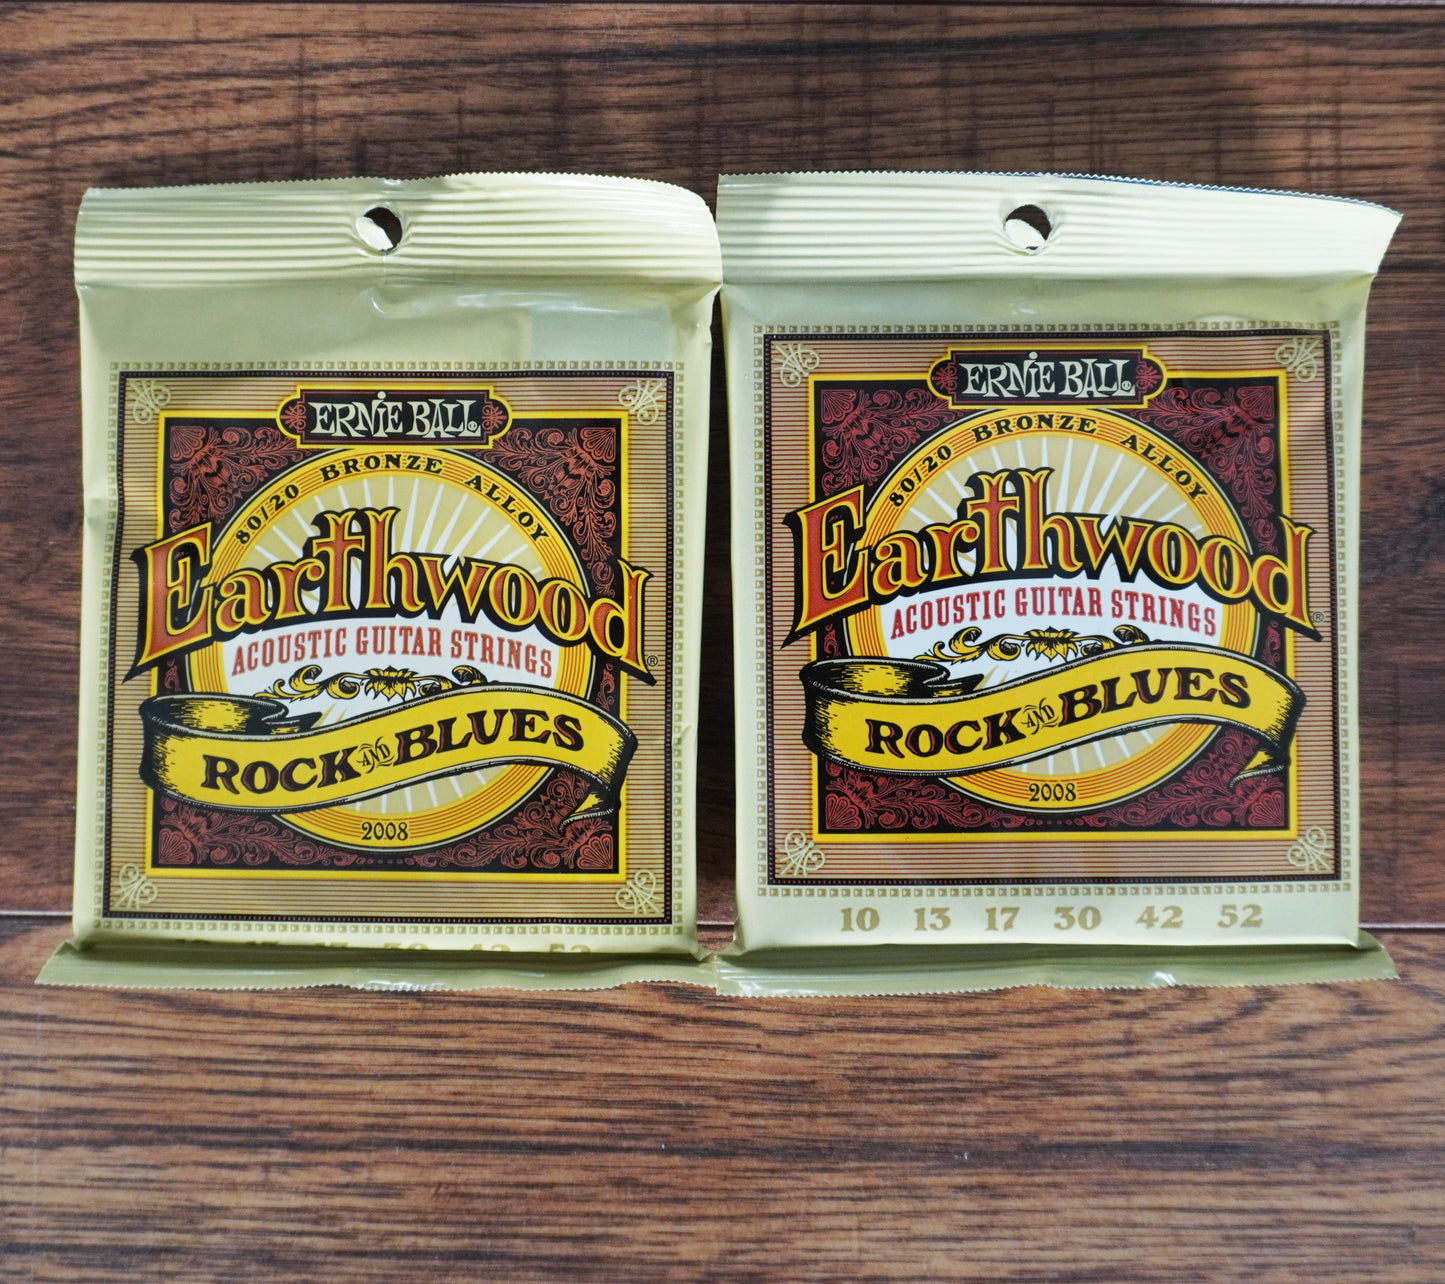 Ernie Ball 2008 Earthwood Rock and Blues Acoustic Guitar String Set 80/20 Bronze 10-52 2 Pack